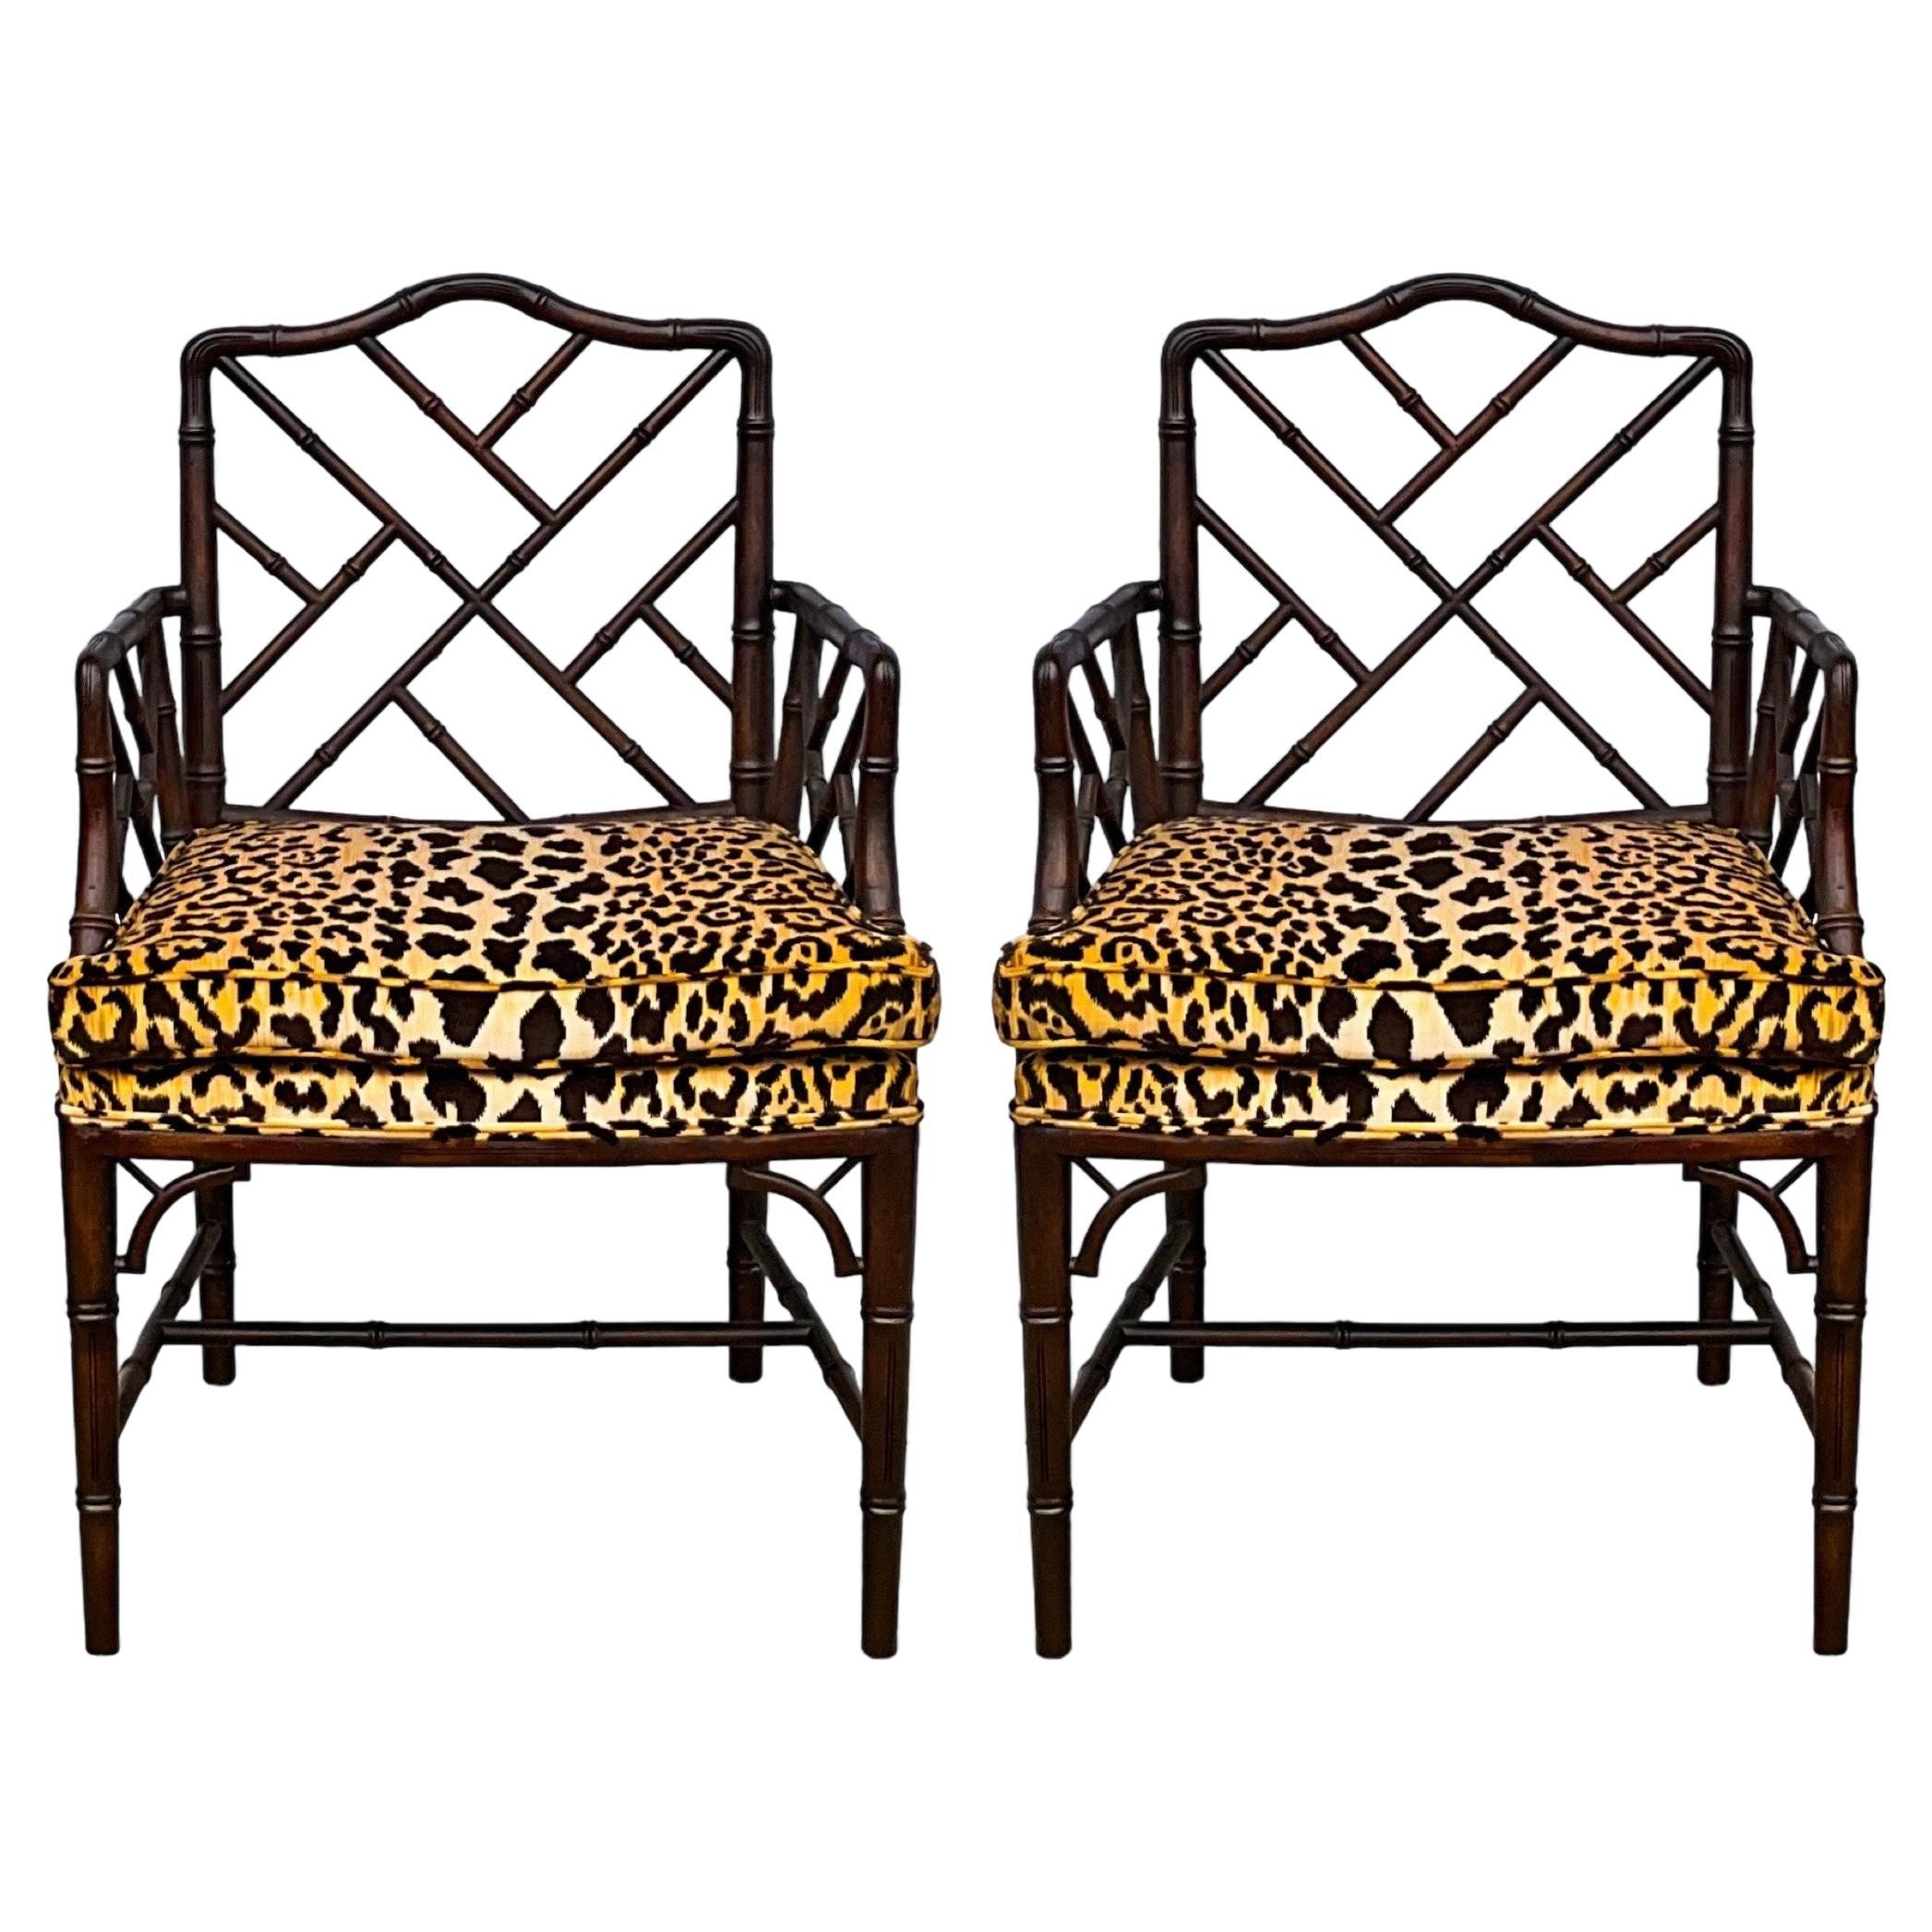 Regency Chinese Chippendale Style Faux Bamboo Arm Chairs In Velvet Leopard -Pair For Sale